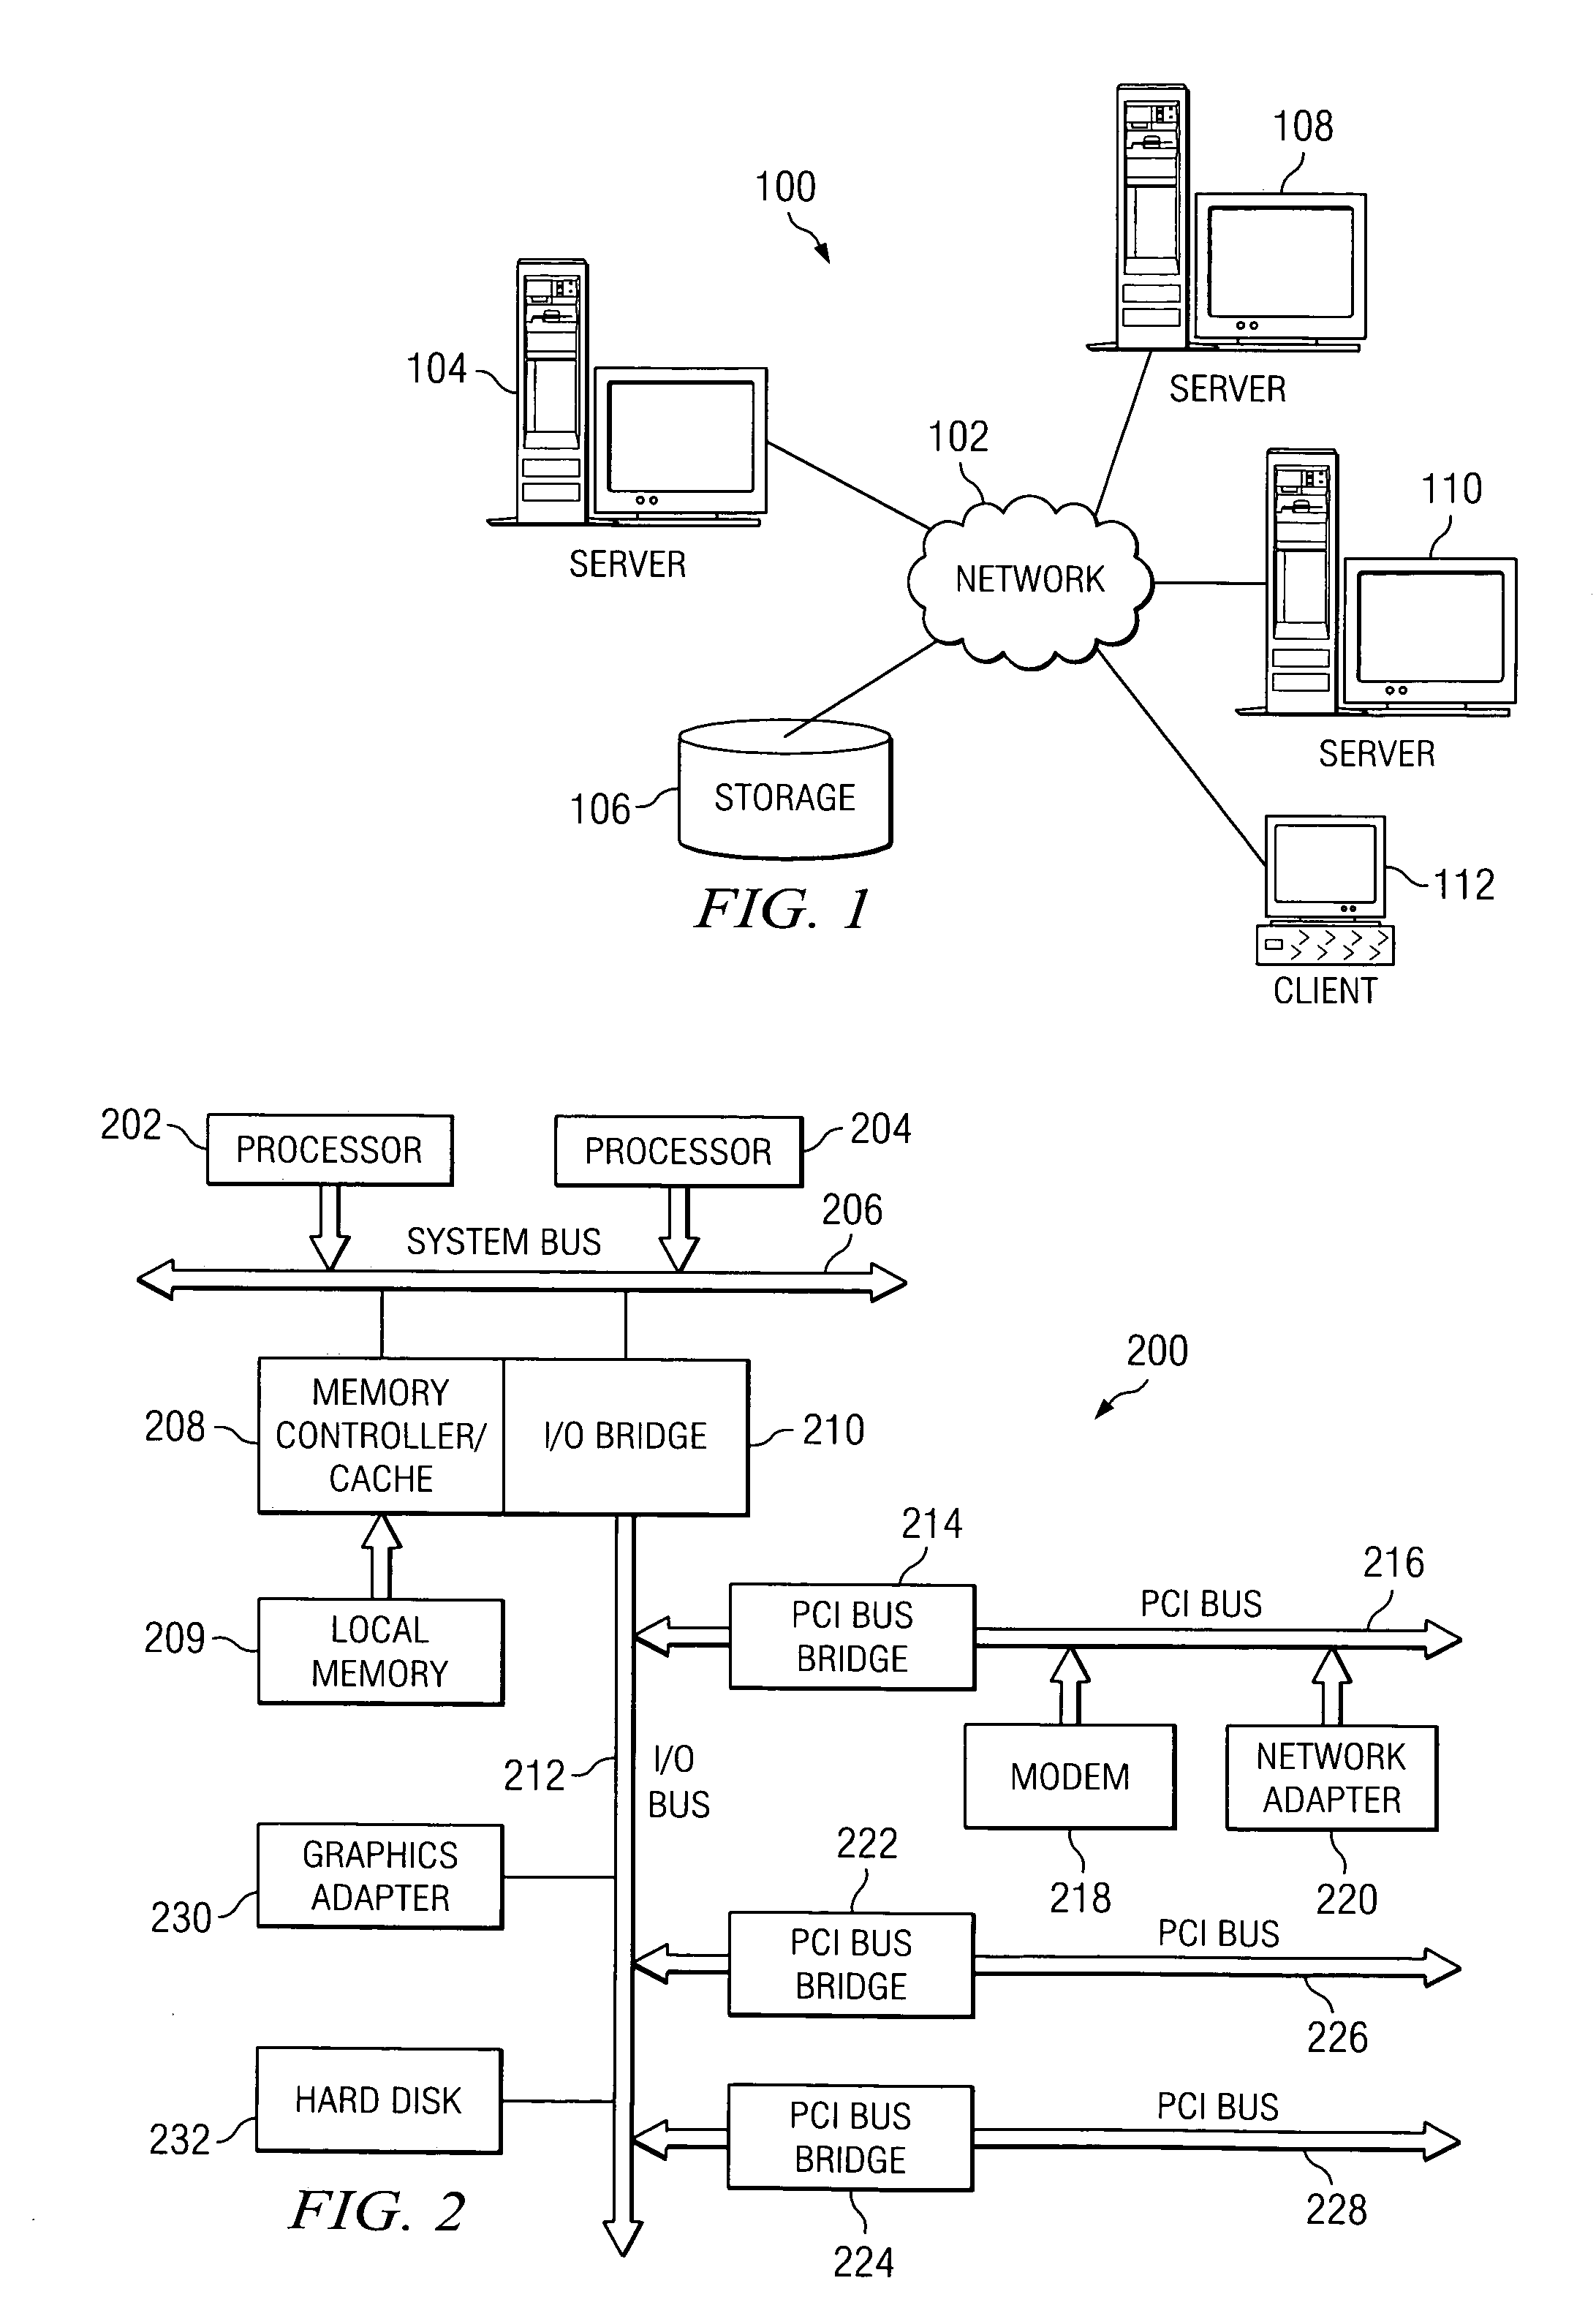 Method for determining load balancing weights using application instance topology information